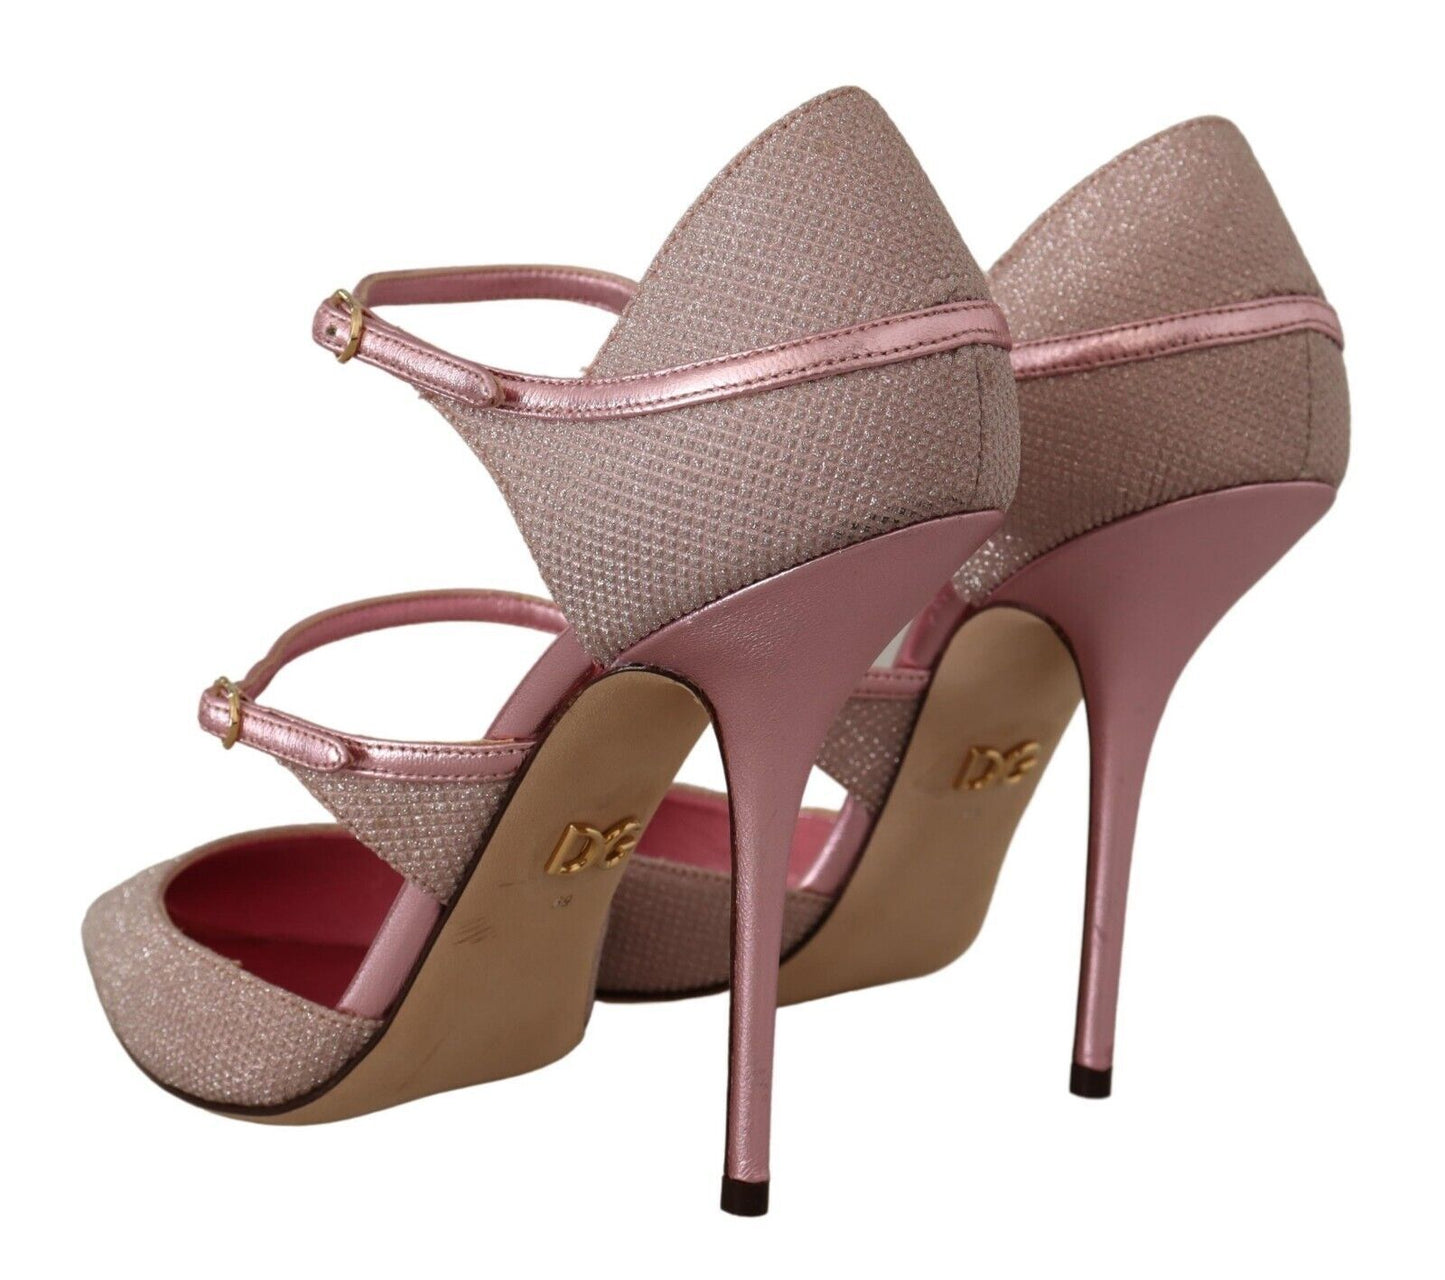 a pair of pink high heeled shoes on a white background